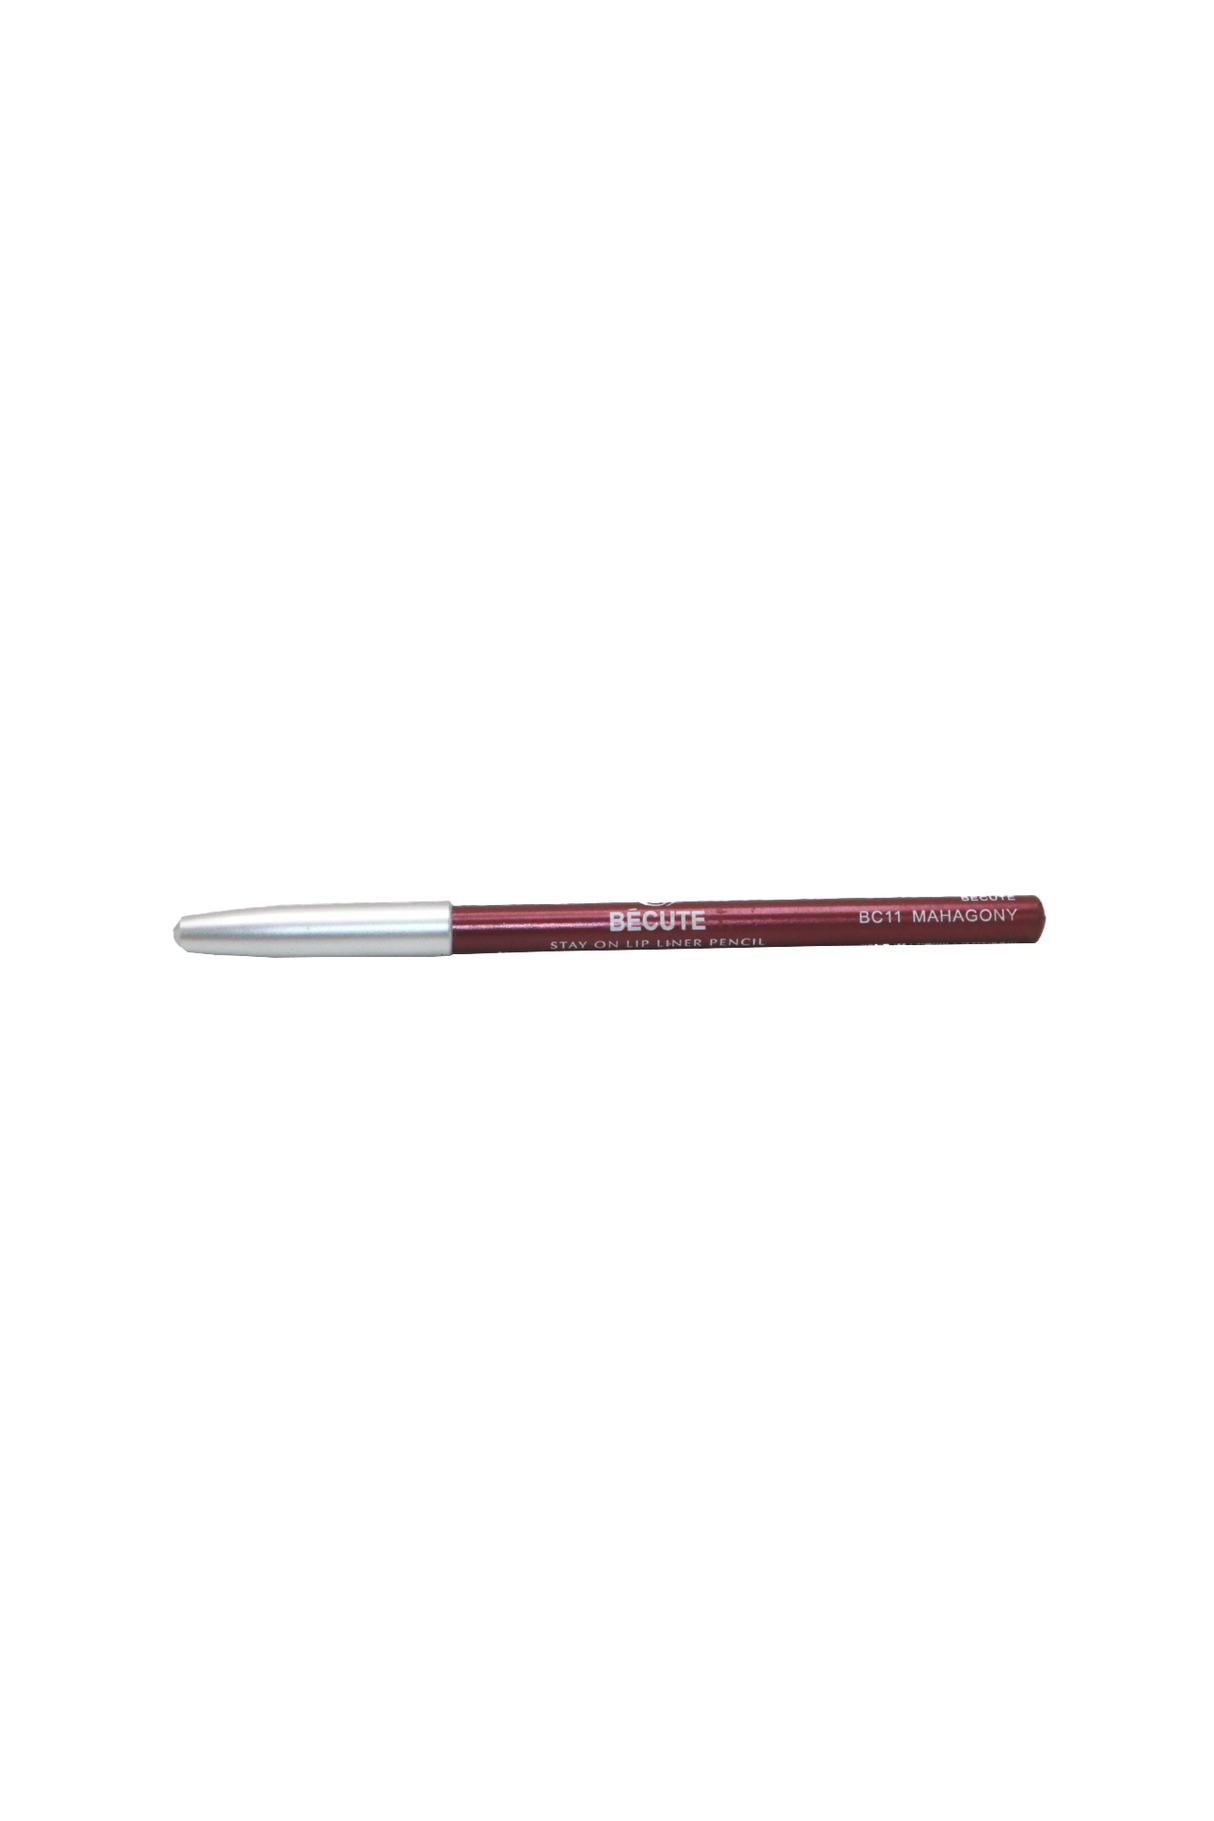 becute lip pencil stay on